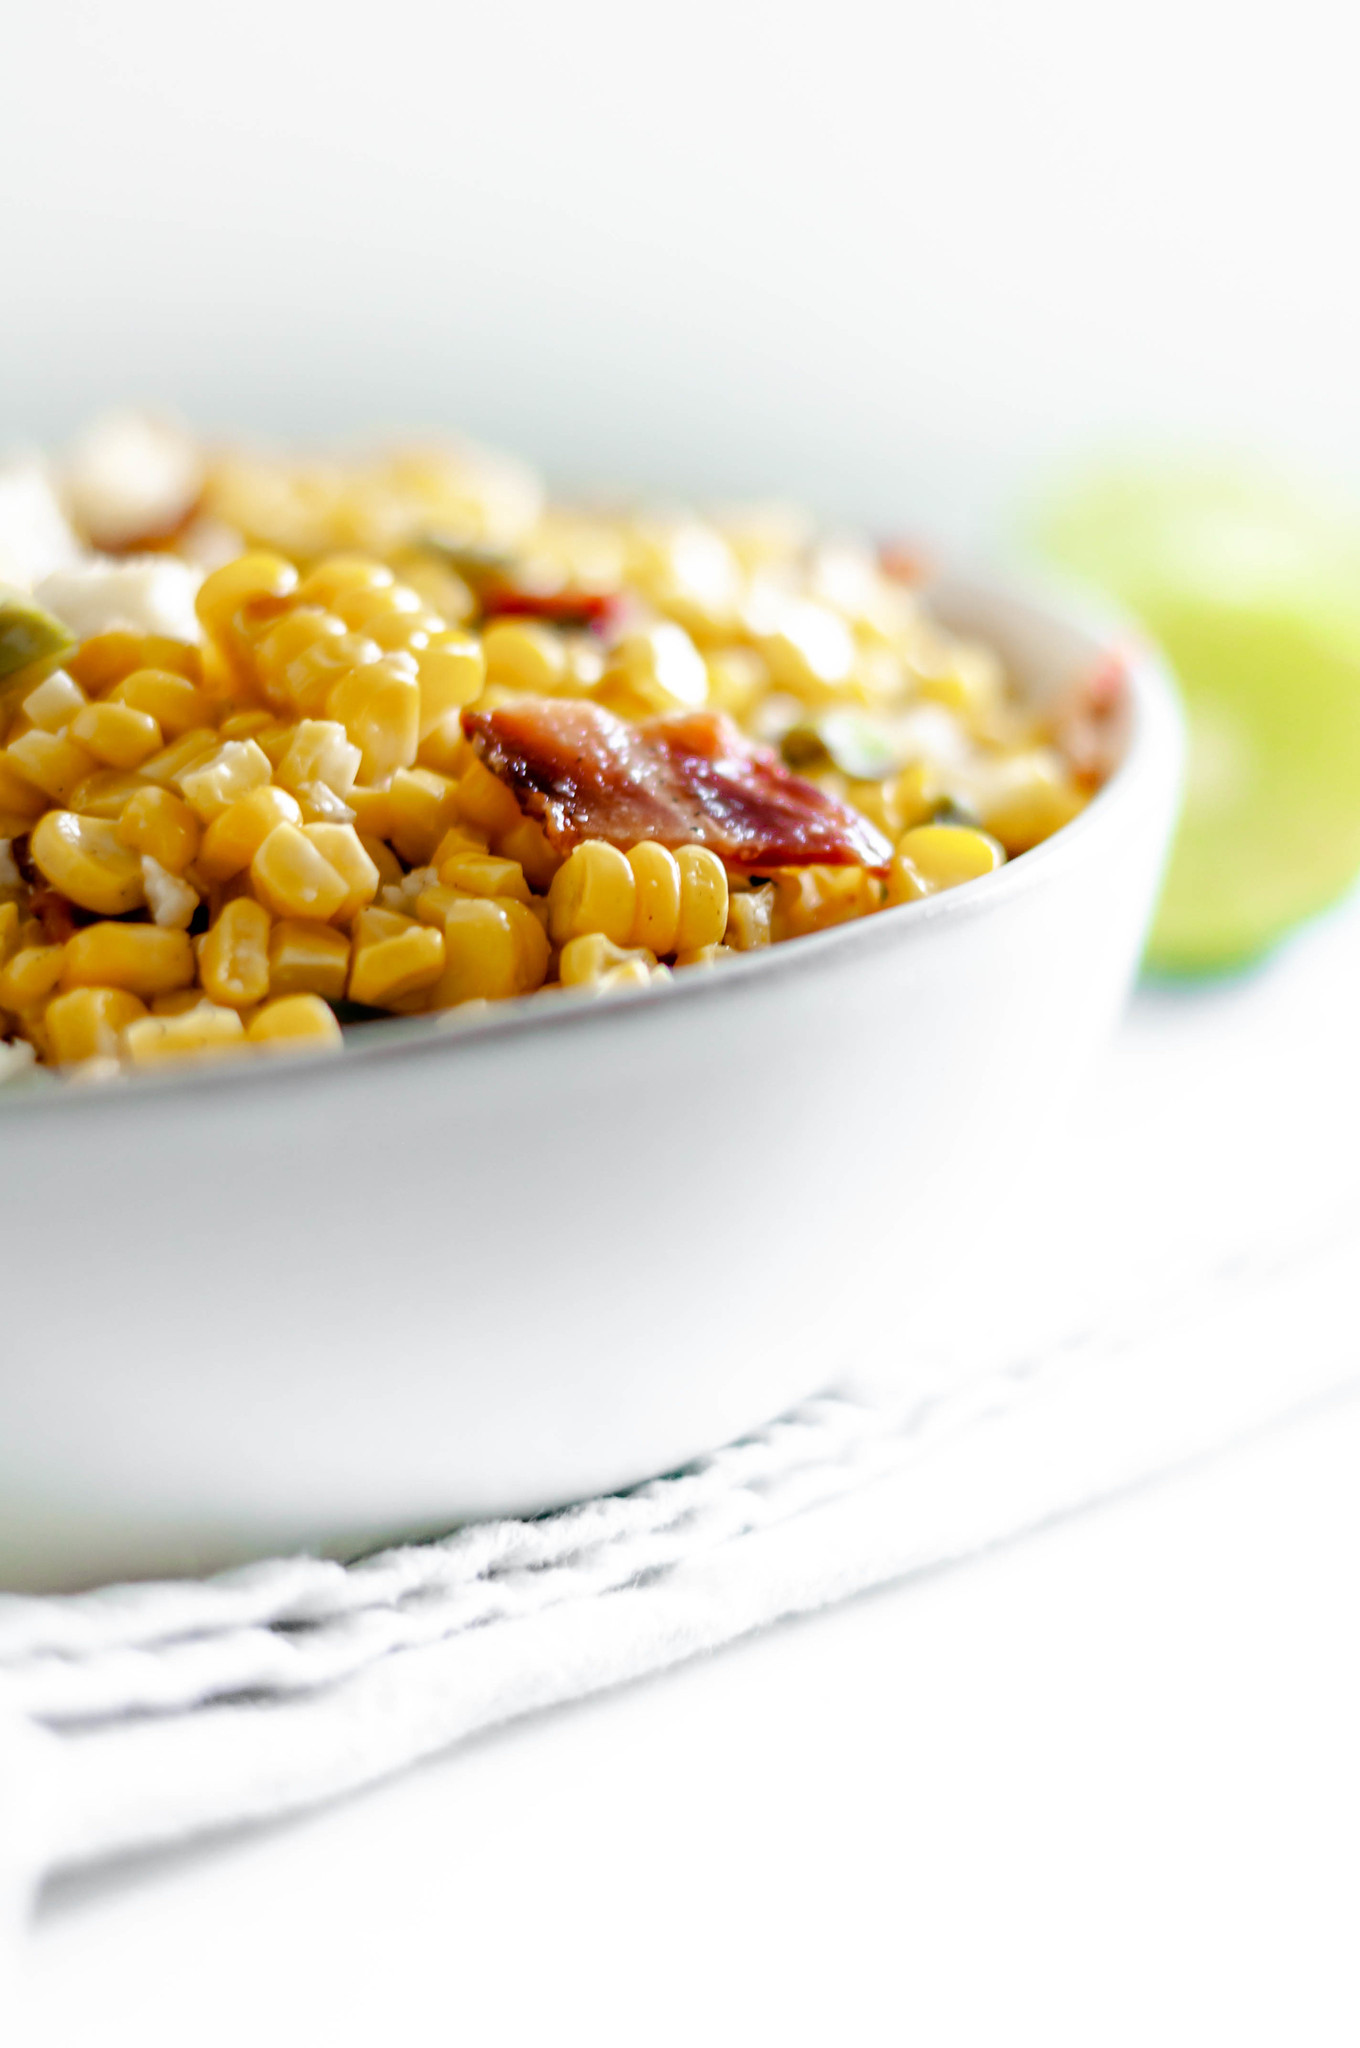 This Grilled Corn Salad with Bacon and Jalapeno is your next potluck dish. Sweet grilled corn, smoky bacon, spicy jalapeno and a bright lime dressing. The perfect addition to any summer barbecue or potluck.